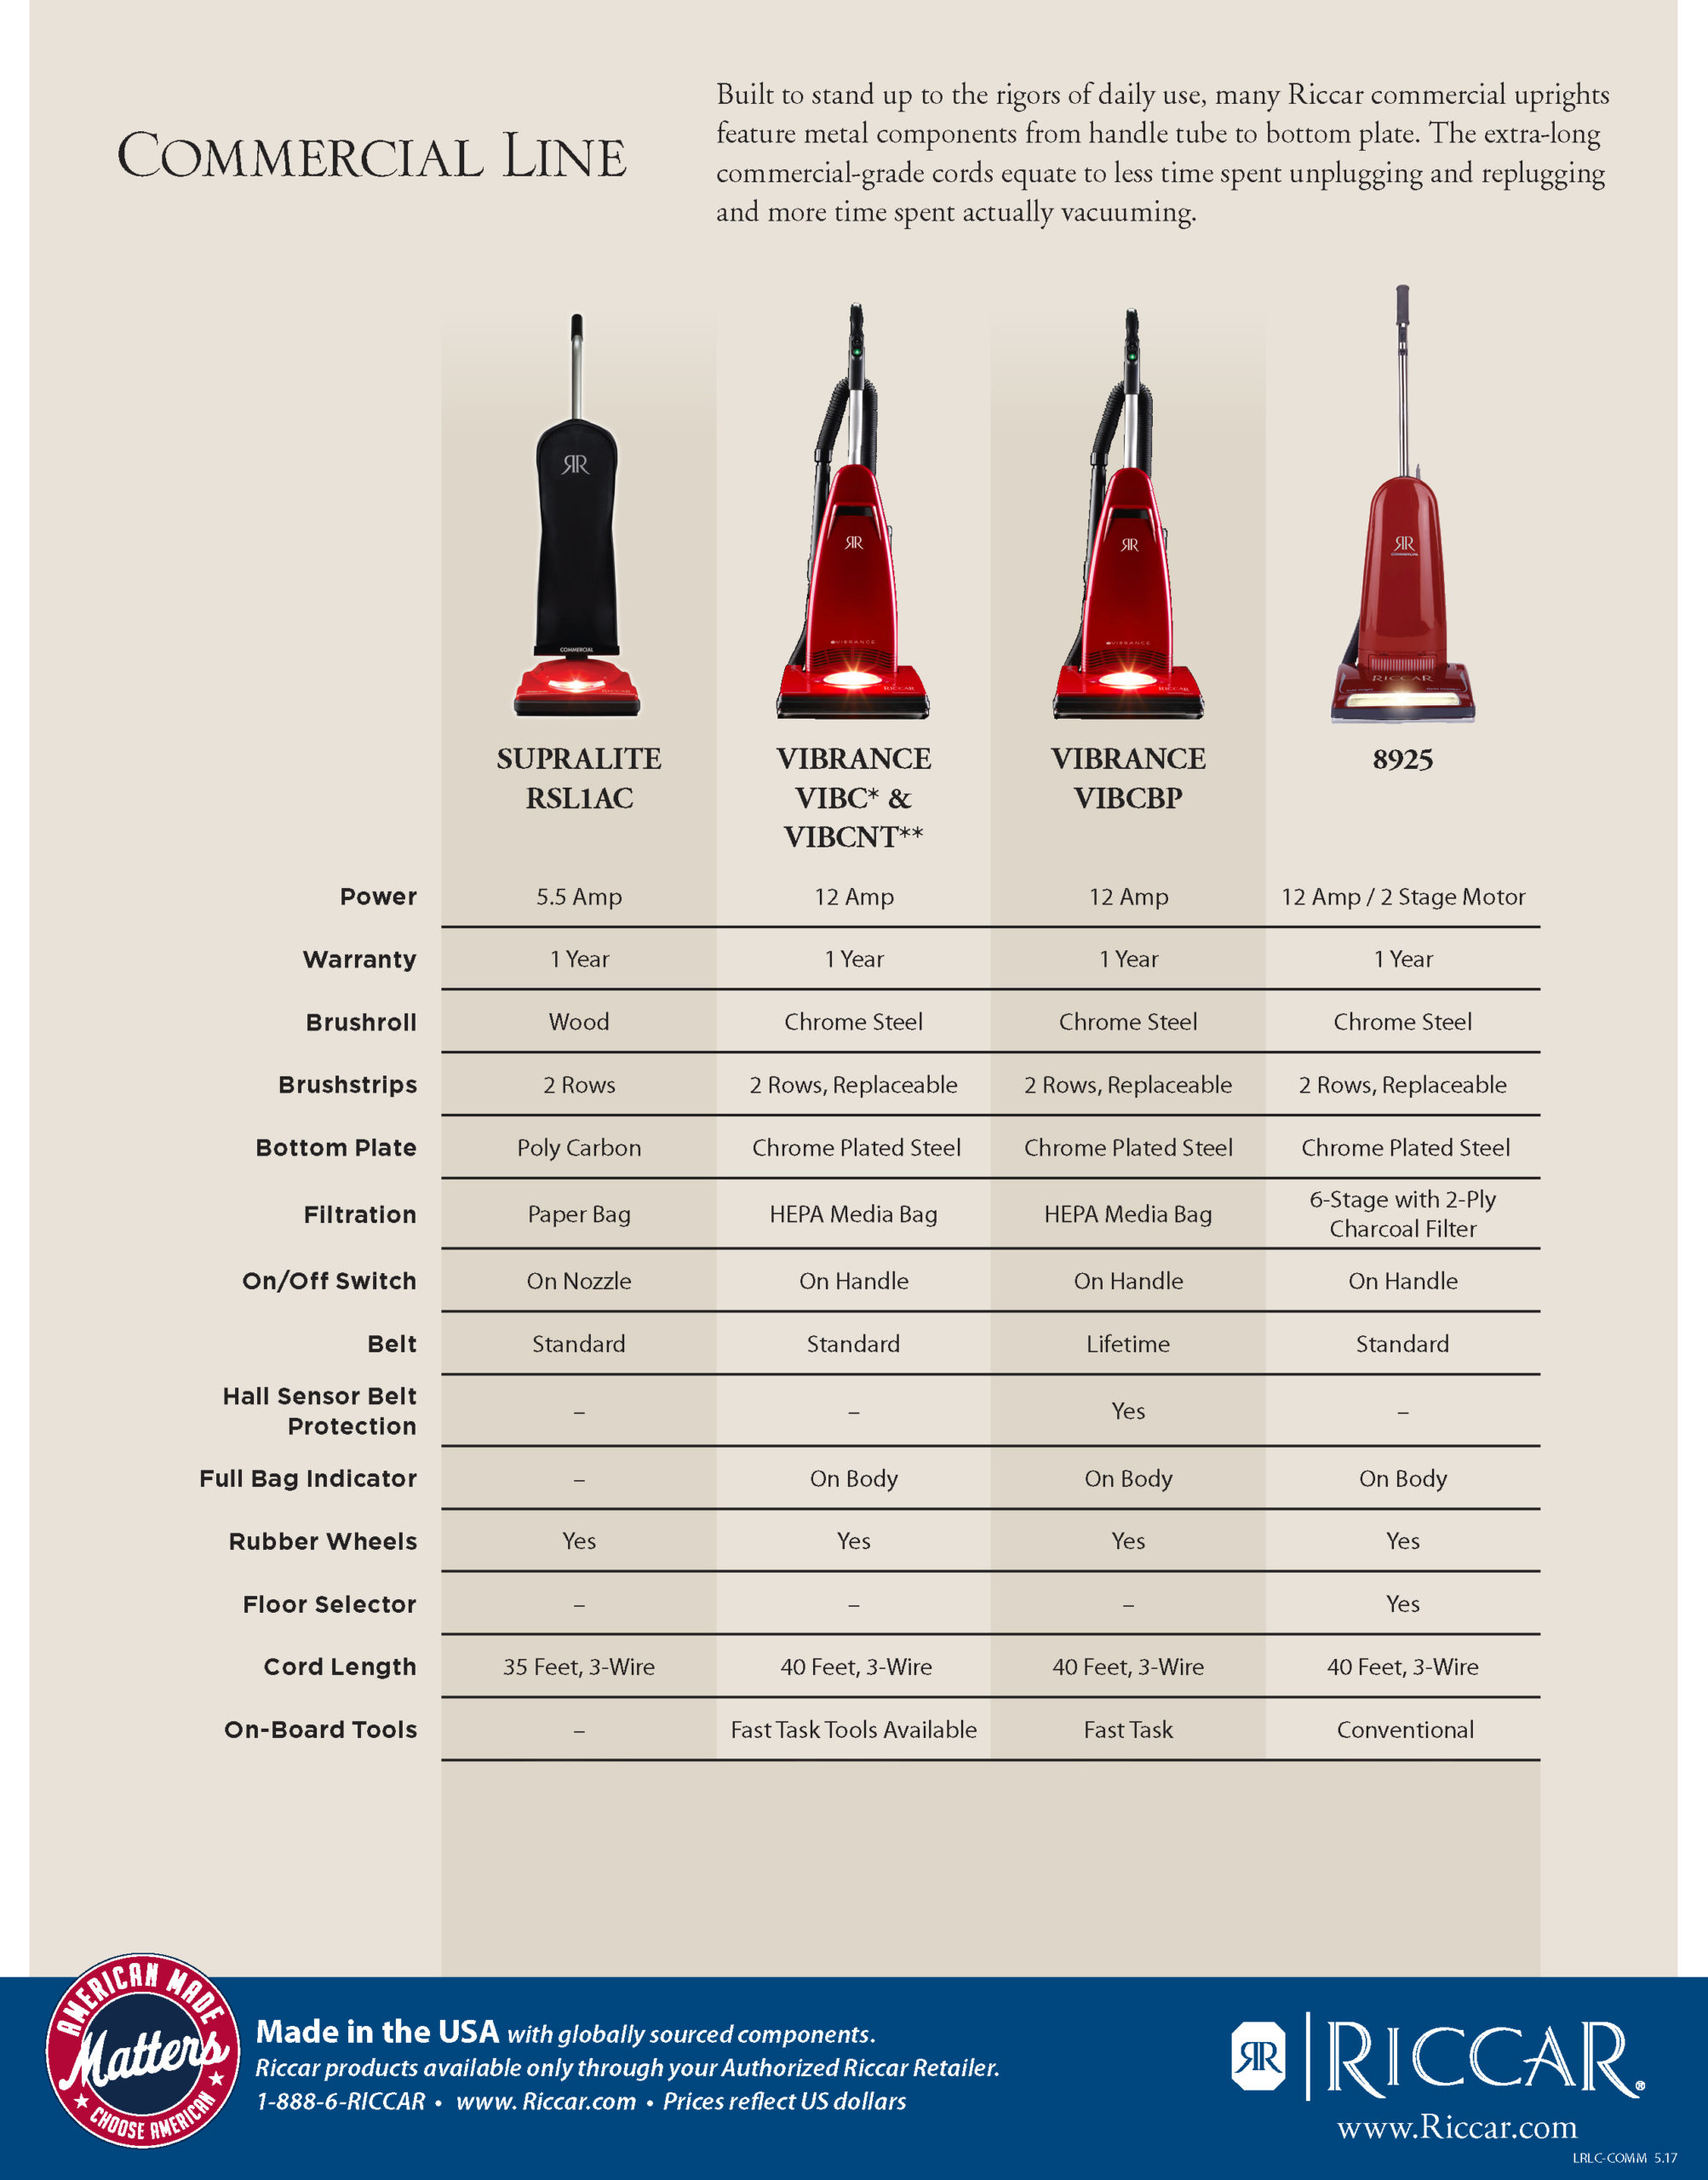 Riccar Commercial Upright Vacuum Cleaner Line